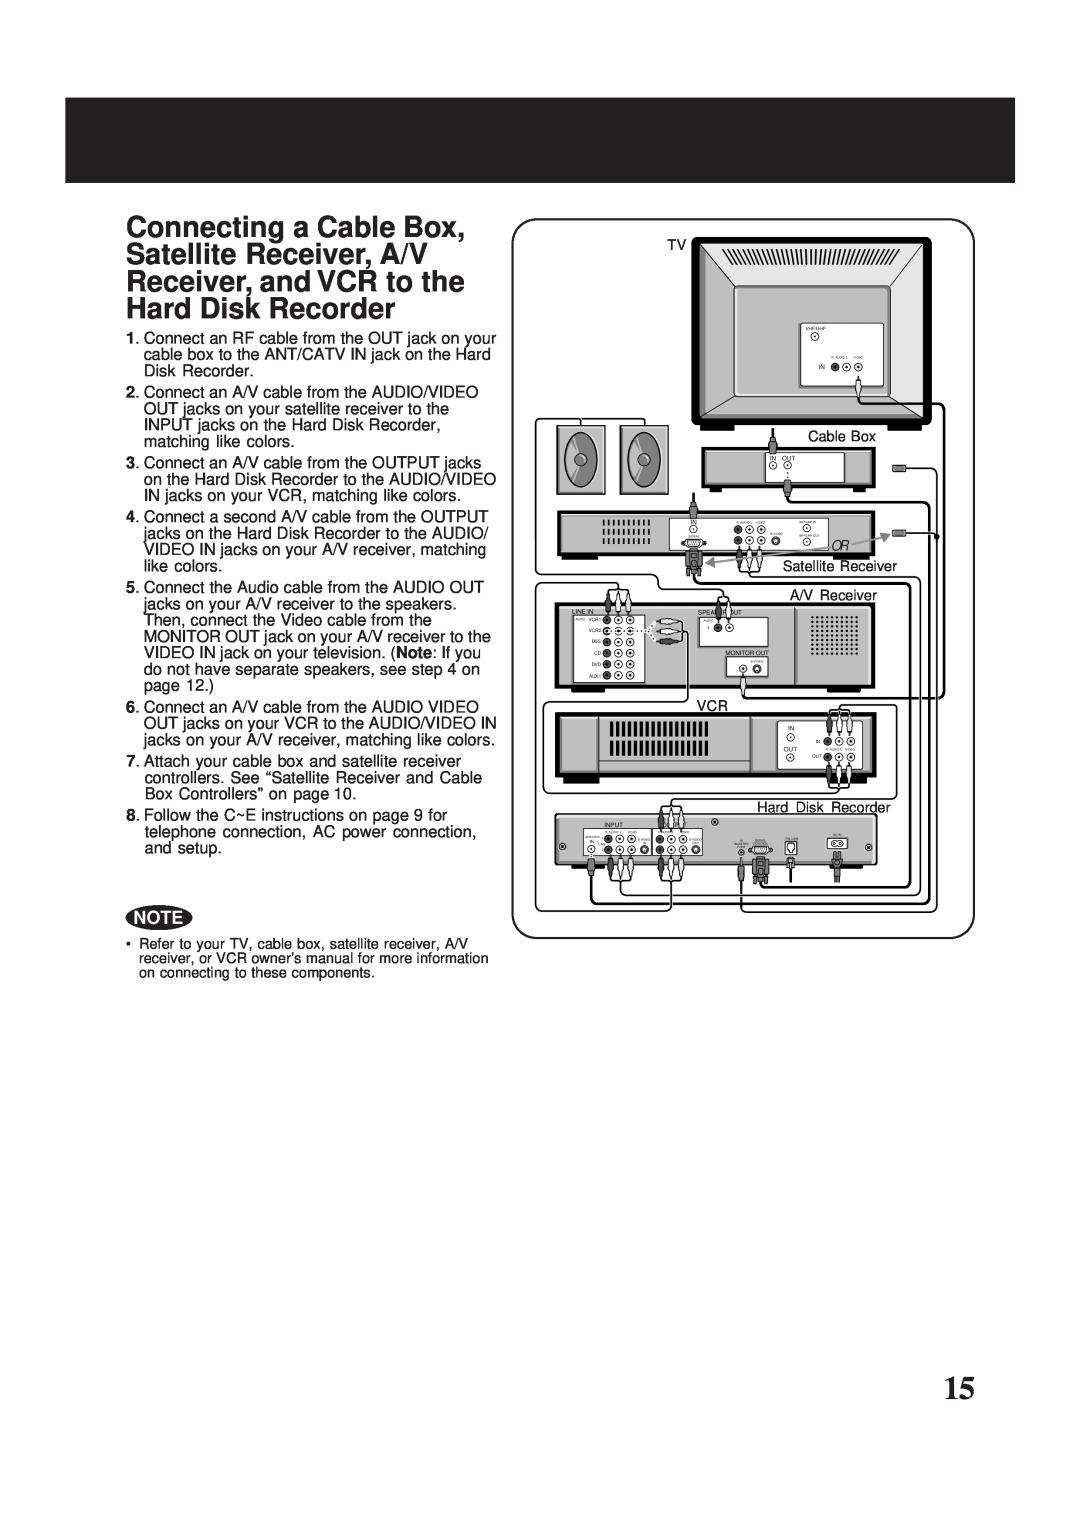 Panasonic PV-HS2000 operating instructions Cable Box, Satellite Receiver A/V Receiver, Hard Disk Recorder 